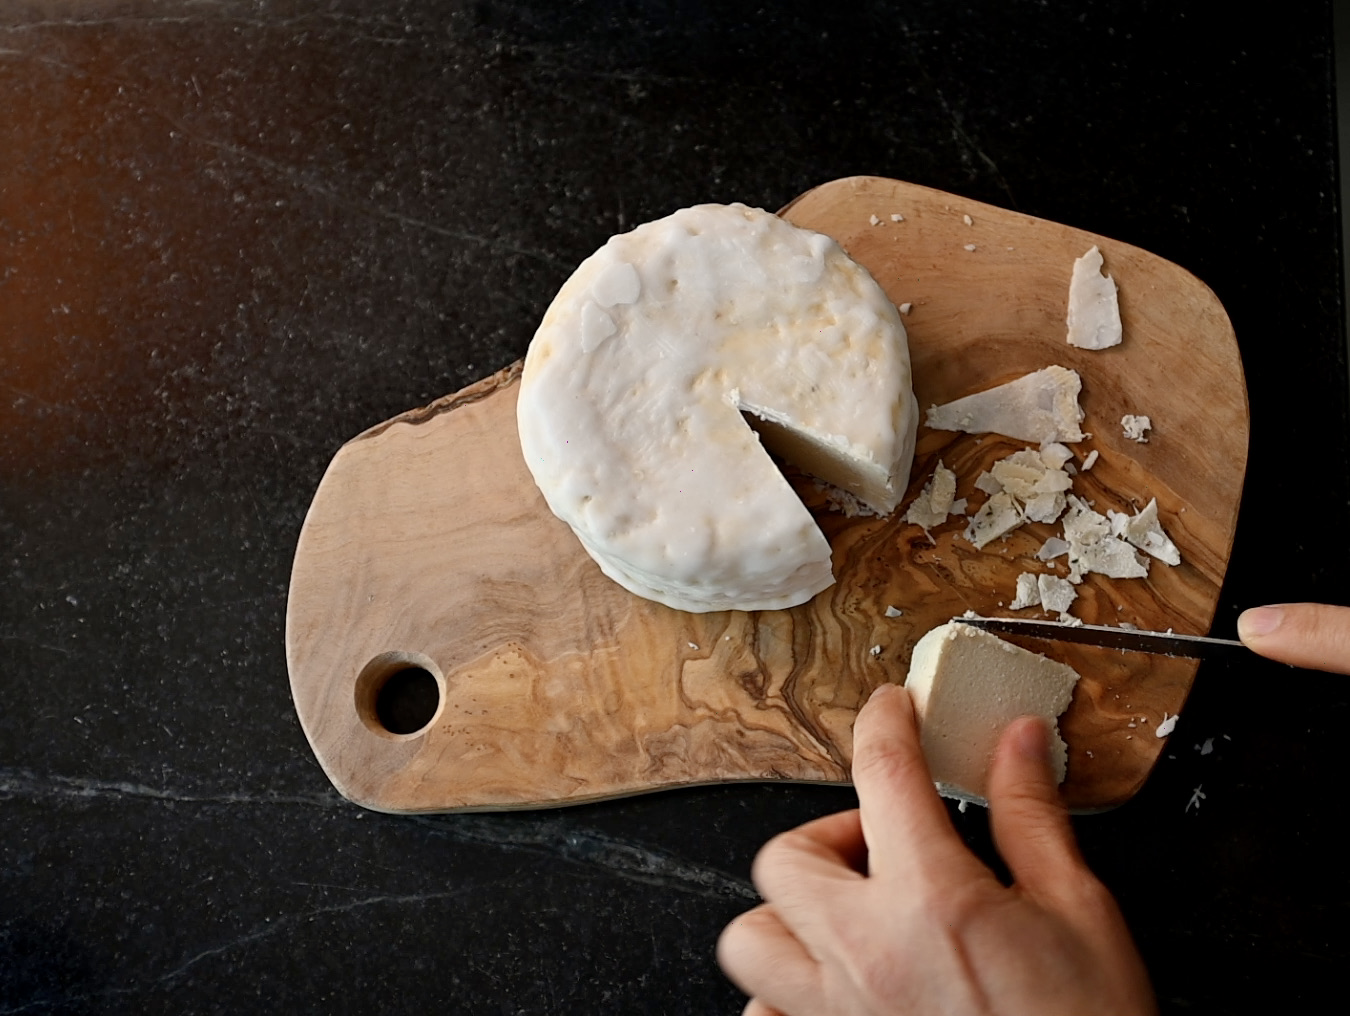 cut the coconut wax from the cheese